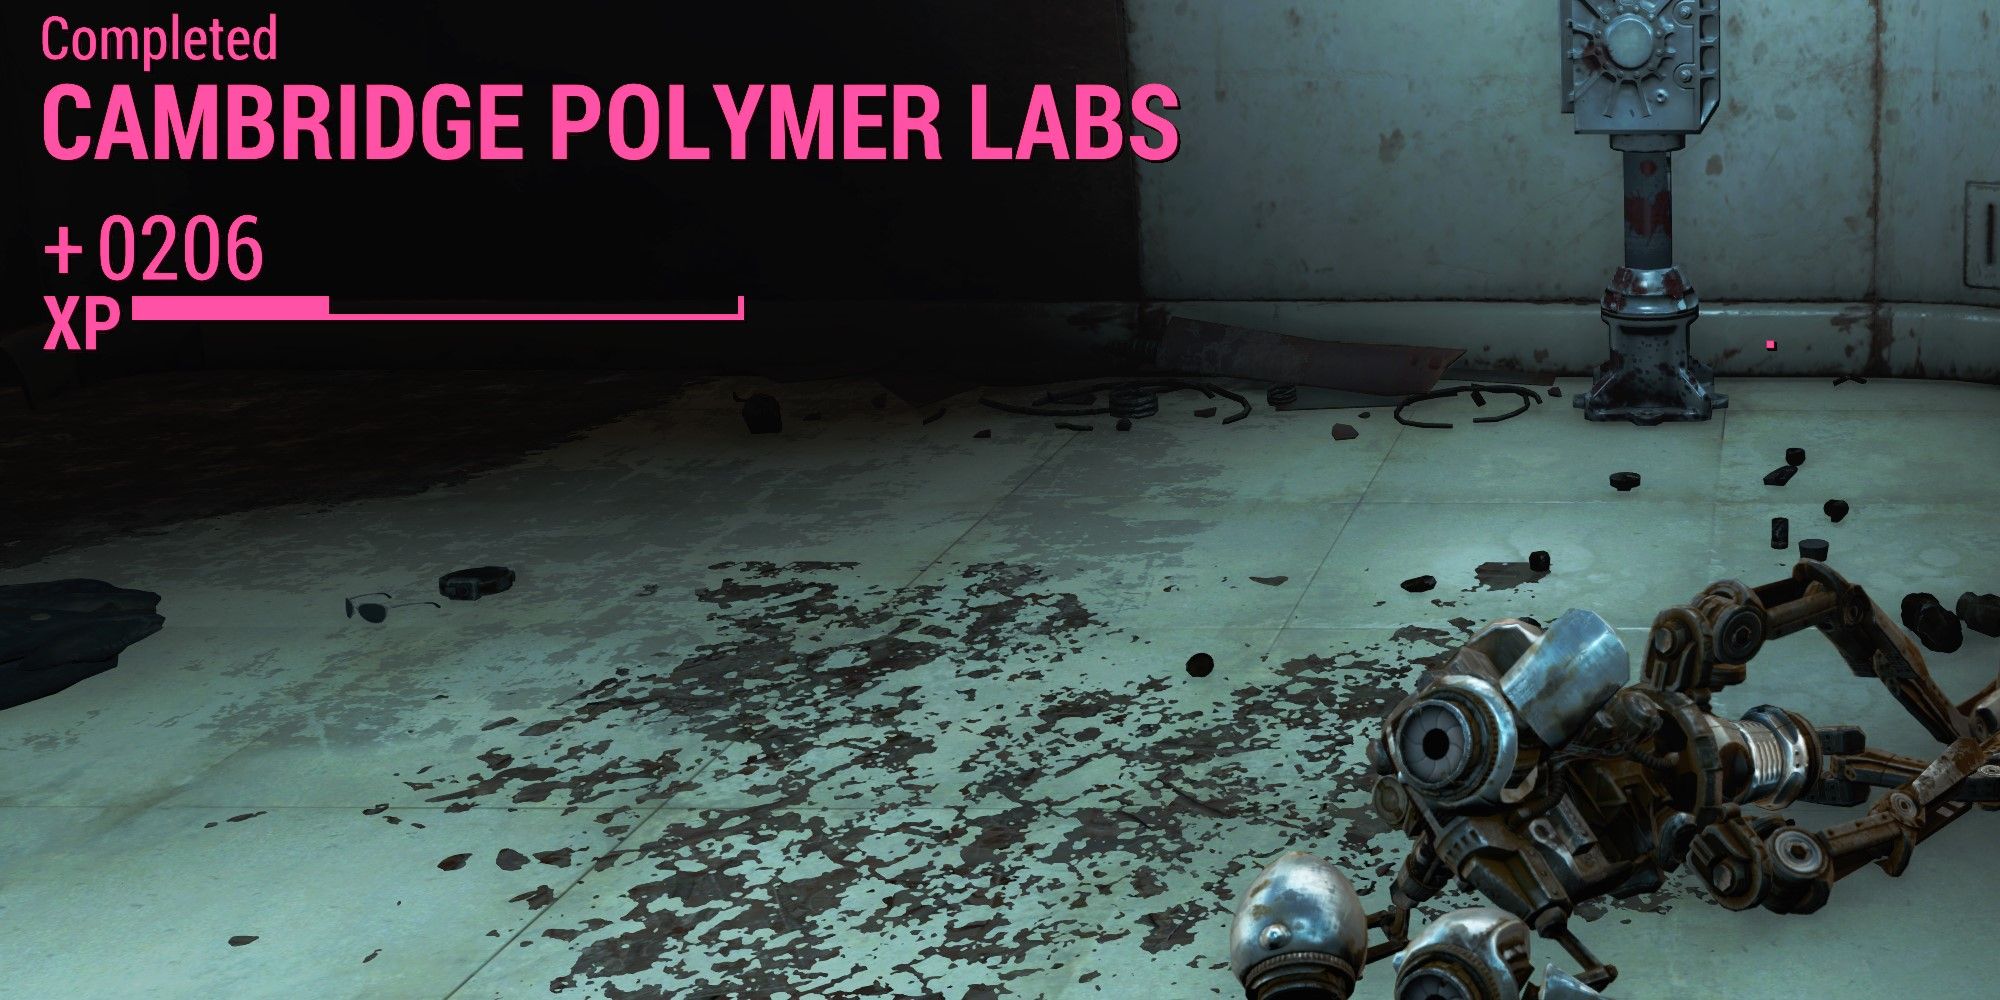 Fallout 4 Cambridge Polymer Labs Molly killed and experience gained